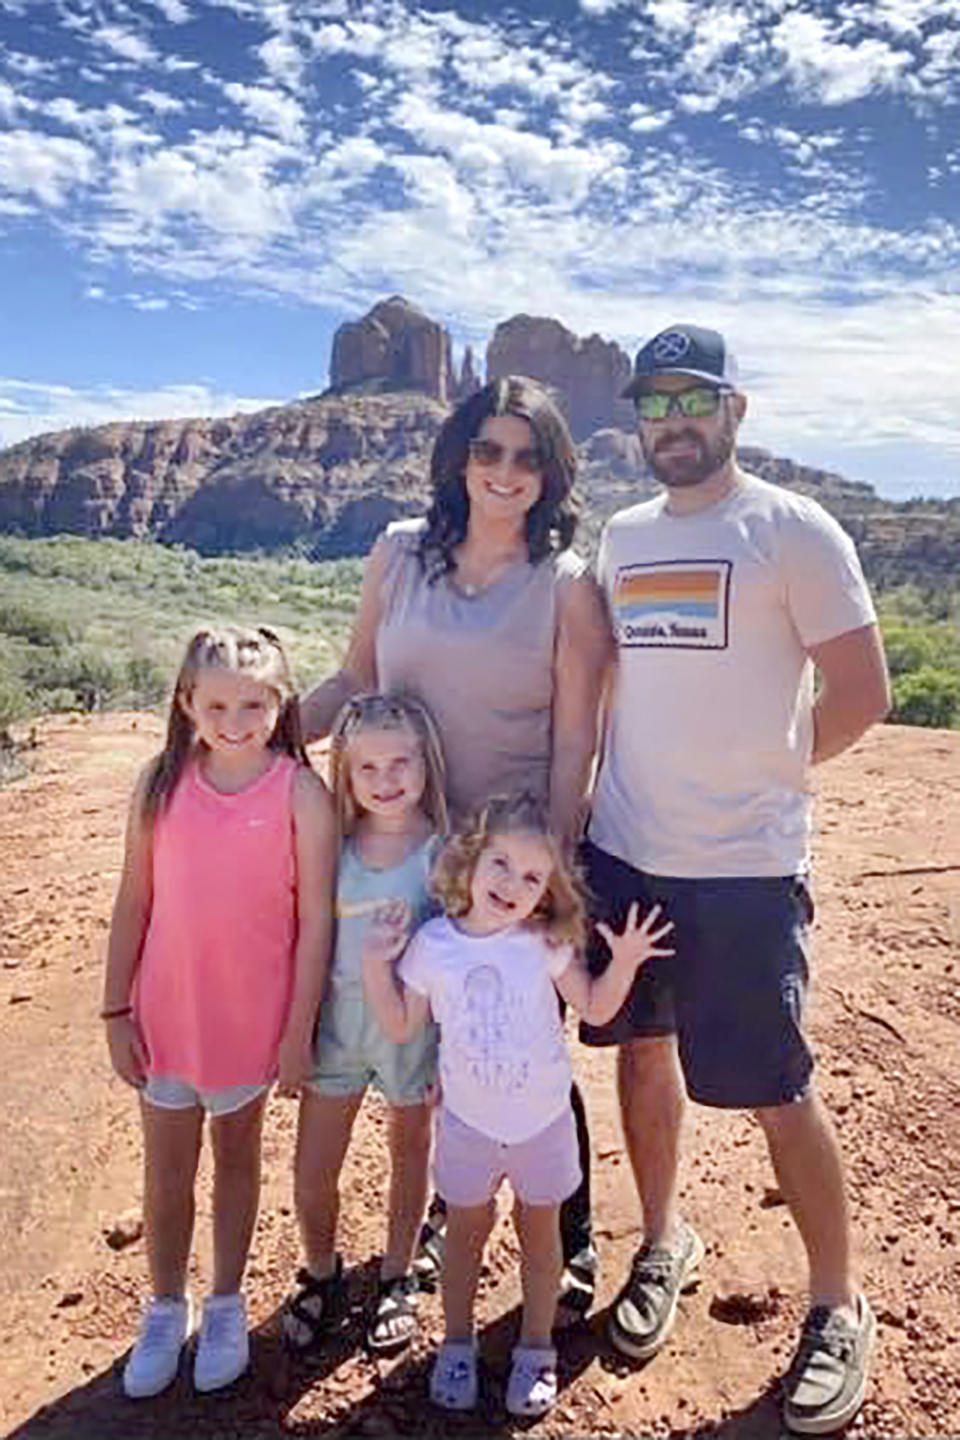 In this undated photo provided by Sandra Hooker, the Rackley family poses for a picture while on a trip to Sedona, Arizona. From left are, Annistyn, 9, Avalinn, 7, Alanna, 3, and their parents, Megan and Trey. Annistyn, who loved swimming, dancing and cheerleading, was among dozens of people who died because of a severe storm, Friday, Dec. 10, 2021. A tornado hit her home and splintered it less than a week after the family had moved in. (Summer Alexander/Courtesy of Sandra Hooker via AP)